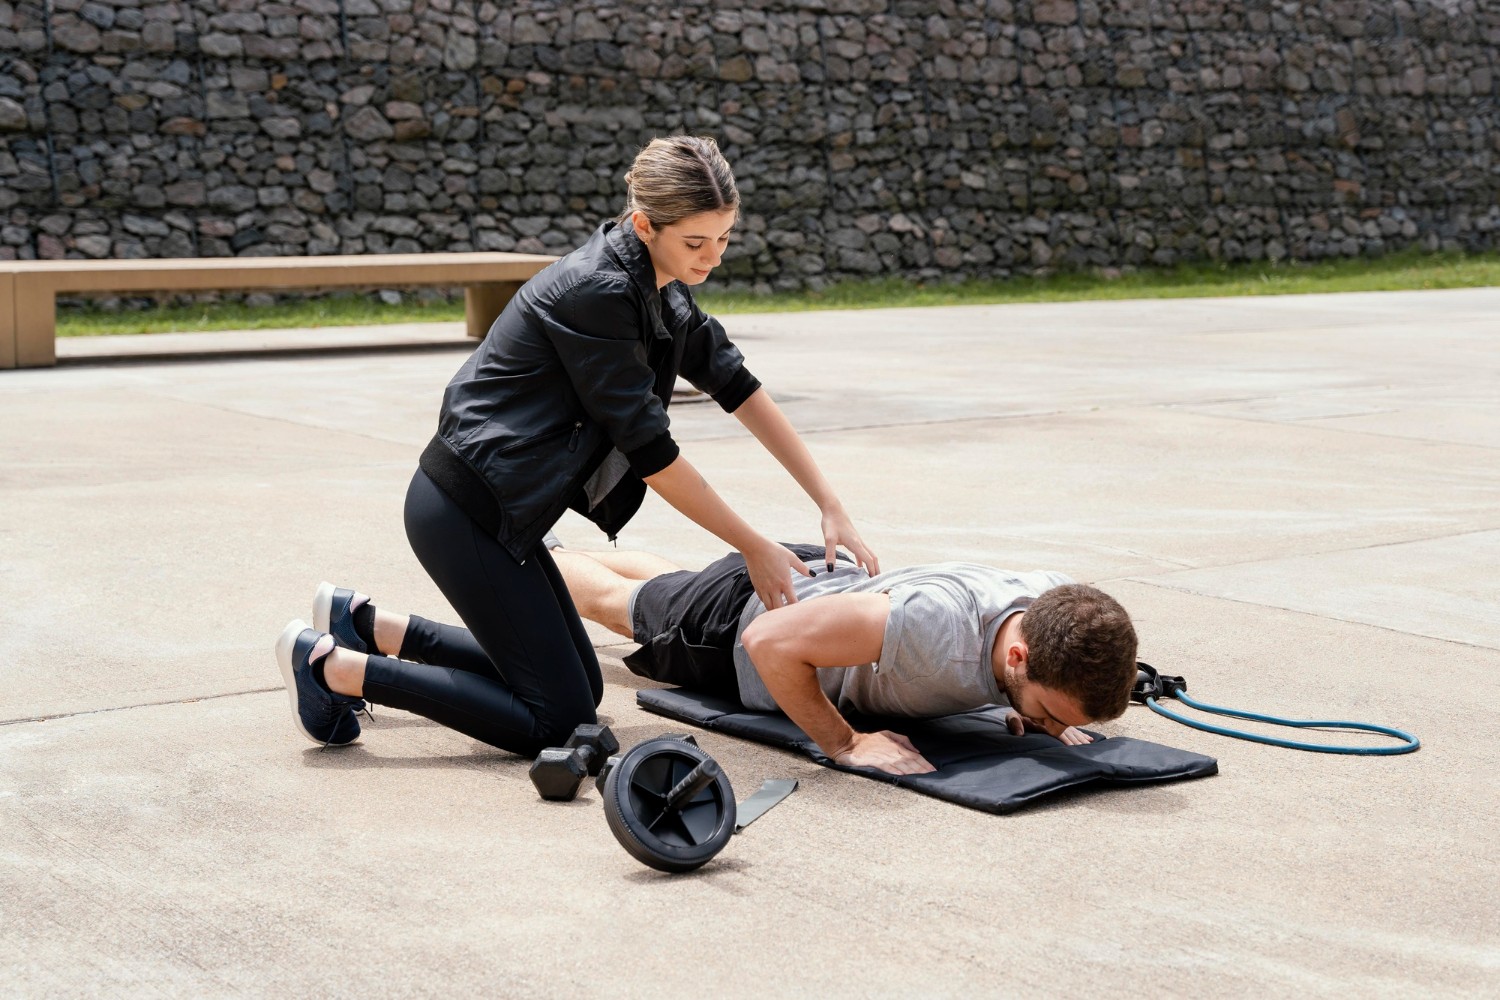 Why is BLS Training Crucial for Athletic Trainers